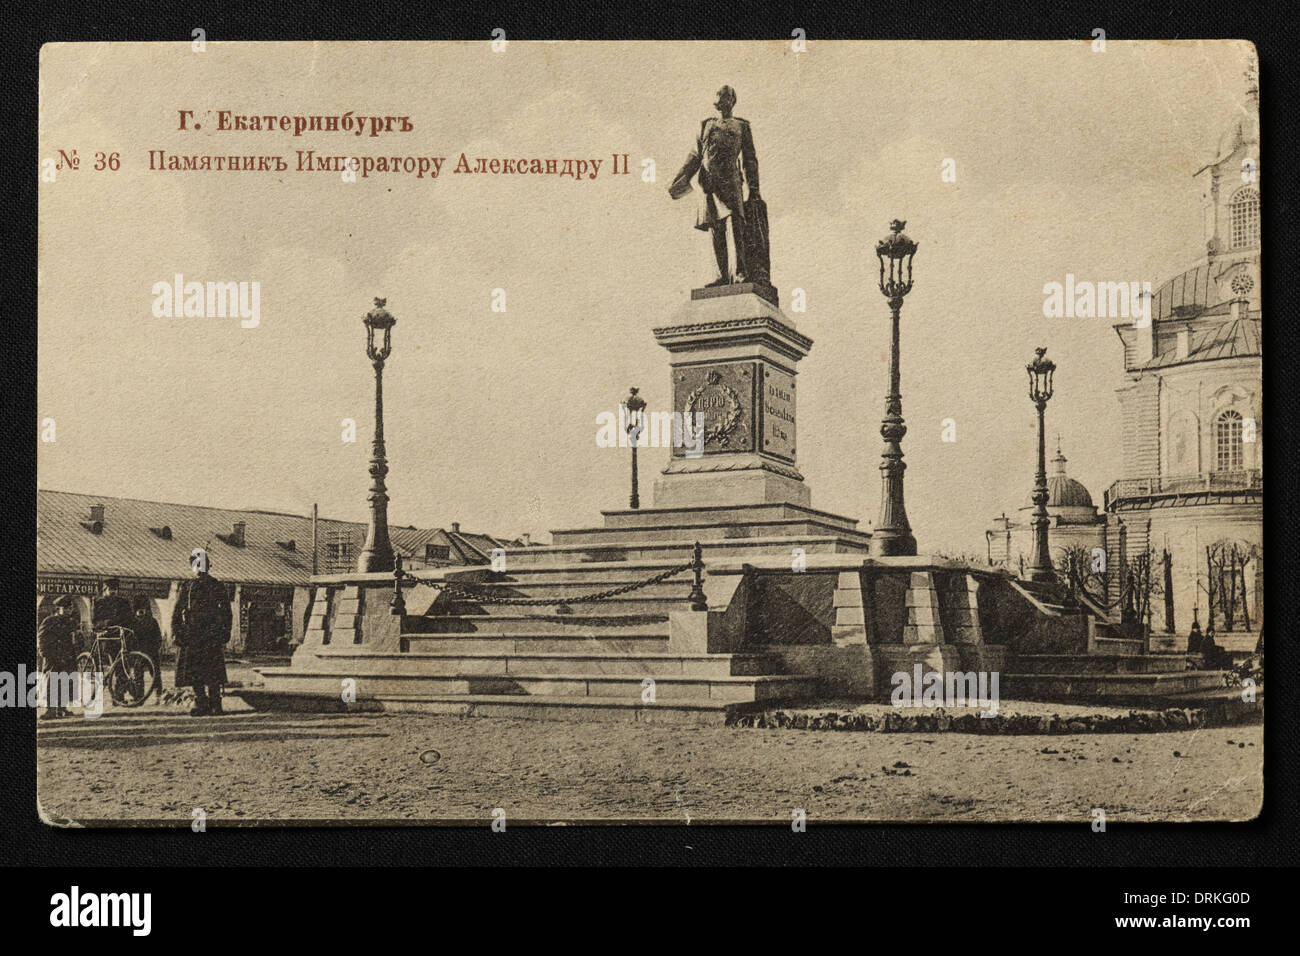 Monument to Tsar Alexander II of Russia in Cathedral Square in Yekaterinburg, Russian Empire. Black and white vintage photograph by Russian photographer Veniamin Metenkov dated from the beginning of the 20th century issued in the Russian vintage postcard published by Veniamin Metenkov himself in Yekaterinburg. Text in Russian: Yekaterinburg. Monument to Emperor Alexander II. The monument was demolished shortly after the Bolshevik Revolution in 1917. Courtesy of the Azoor Postcard Collection. Stock Photo